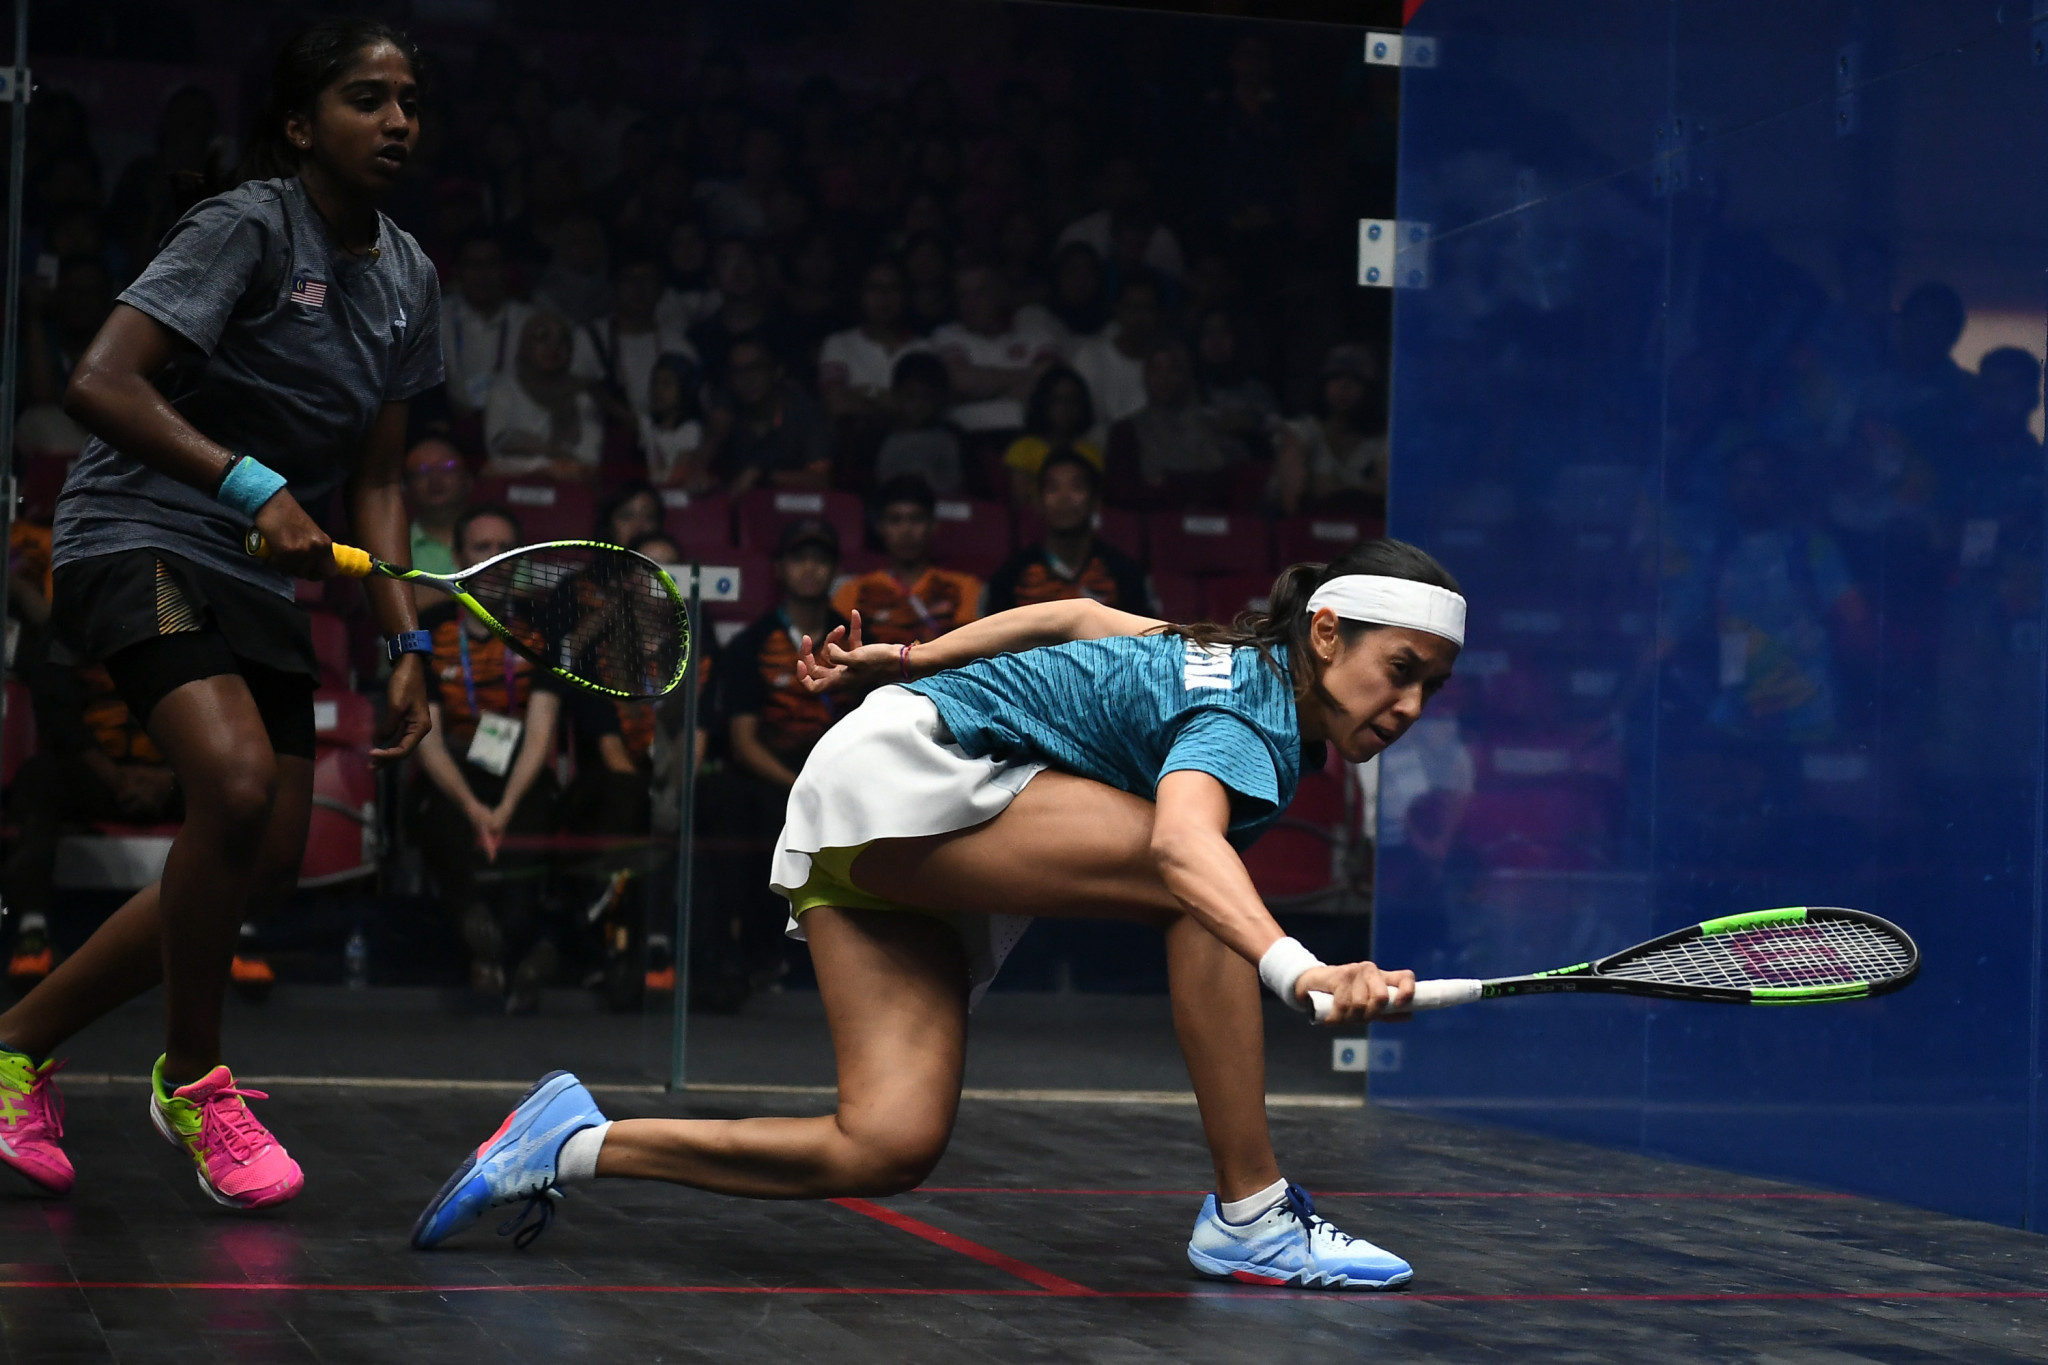 Nicol David beat Sivasangari Subramaniam in an all-Malaysian women's singles squash final to secure her fourth consecutive Asian Games gold medal in the event ©Getty Images